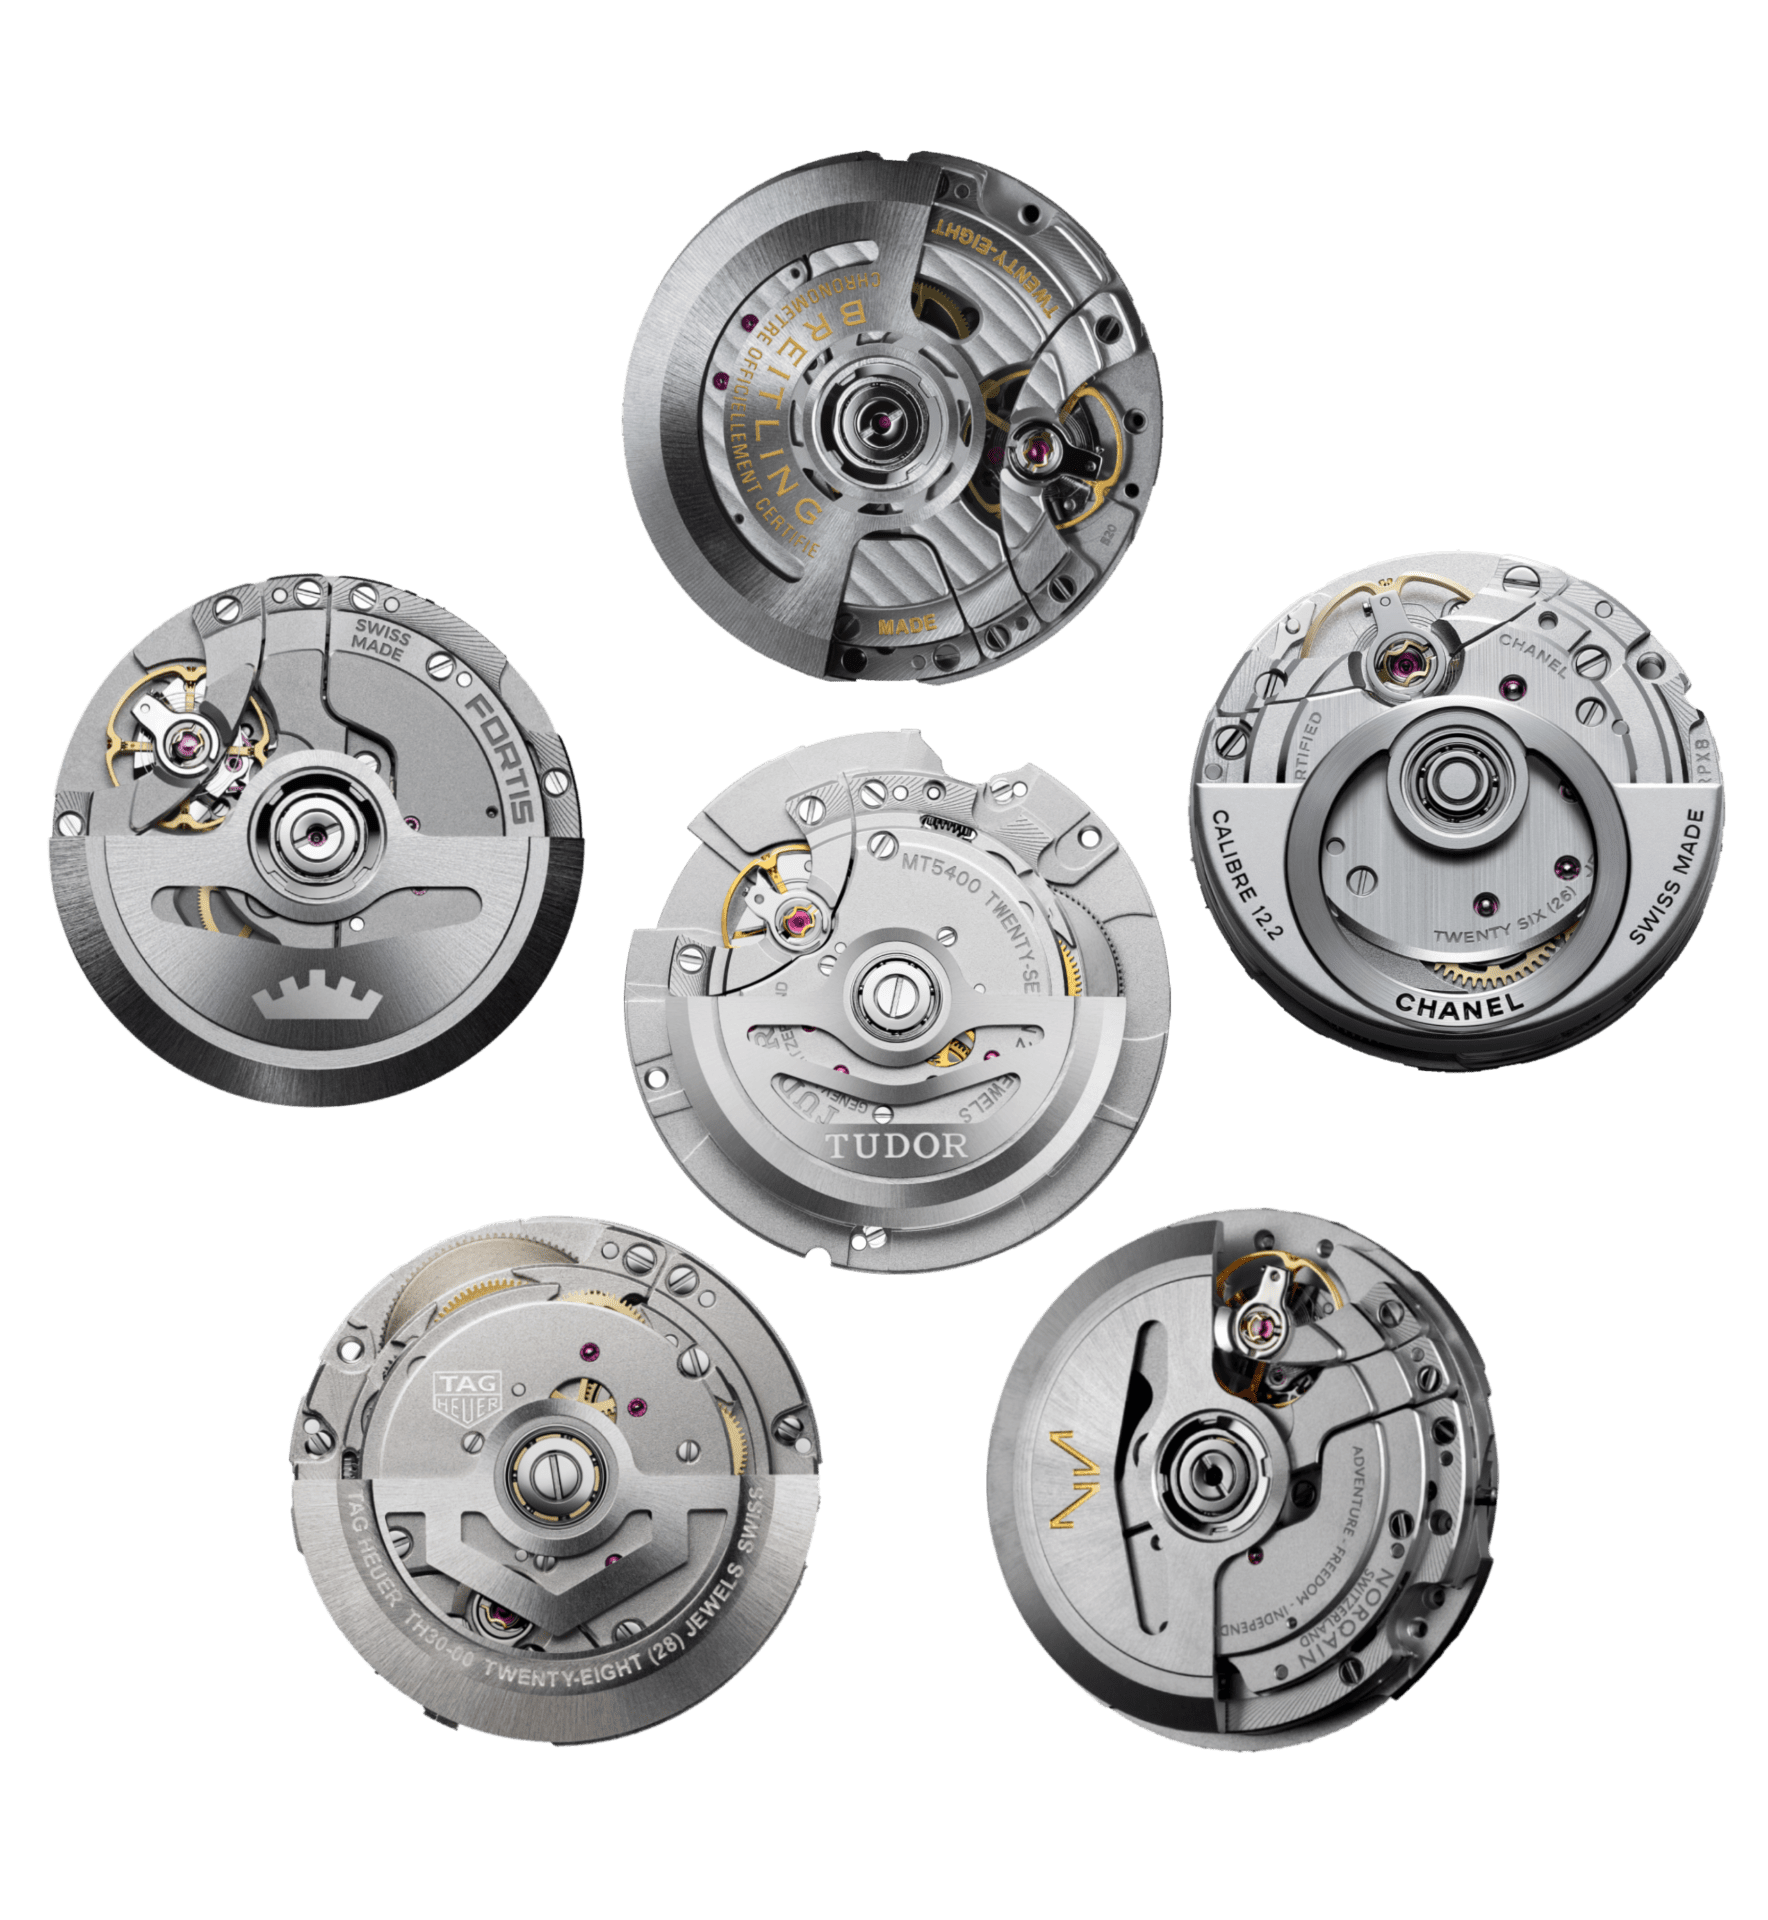 3 watches that prove the ‘lug to lug’ measurement is a more important metric for fit than case diameter